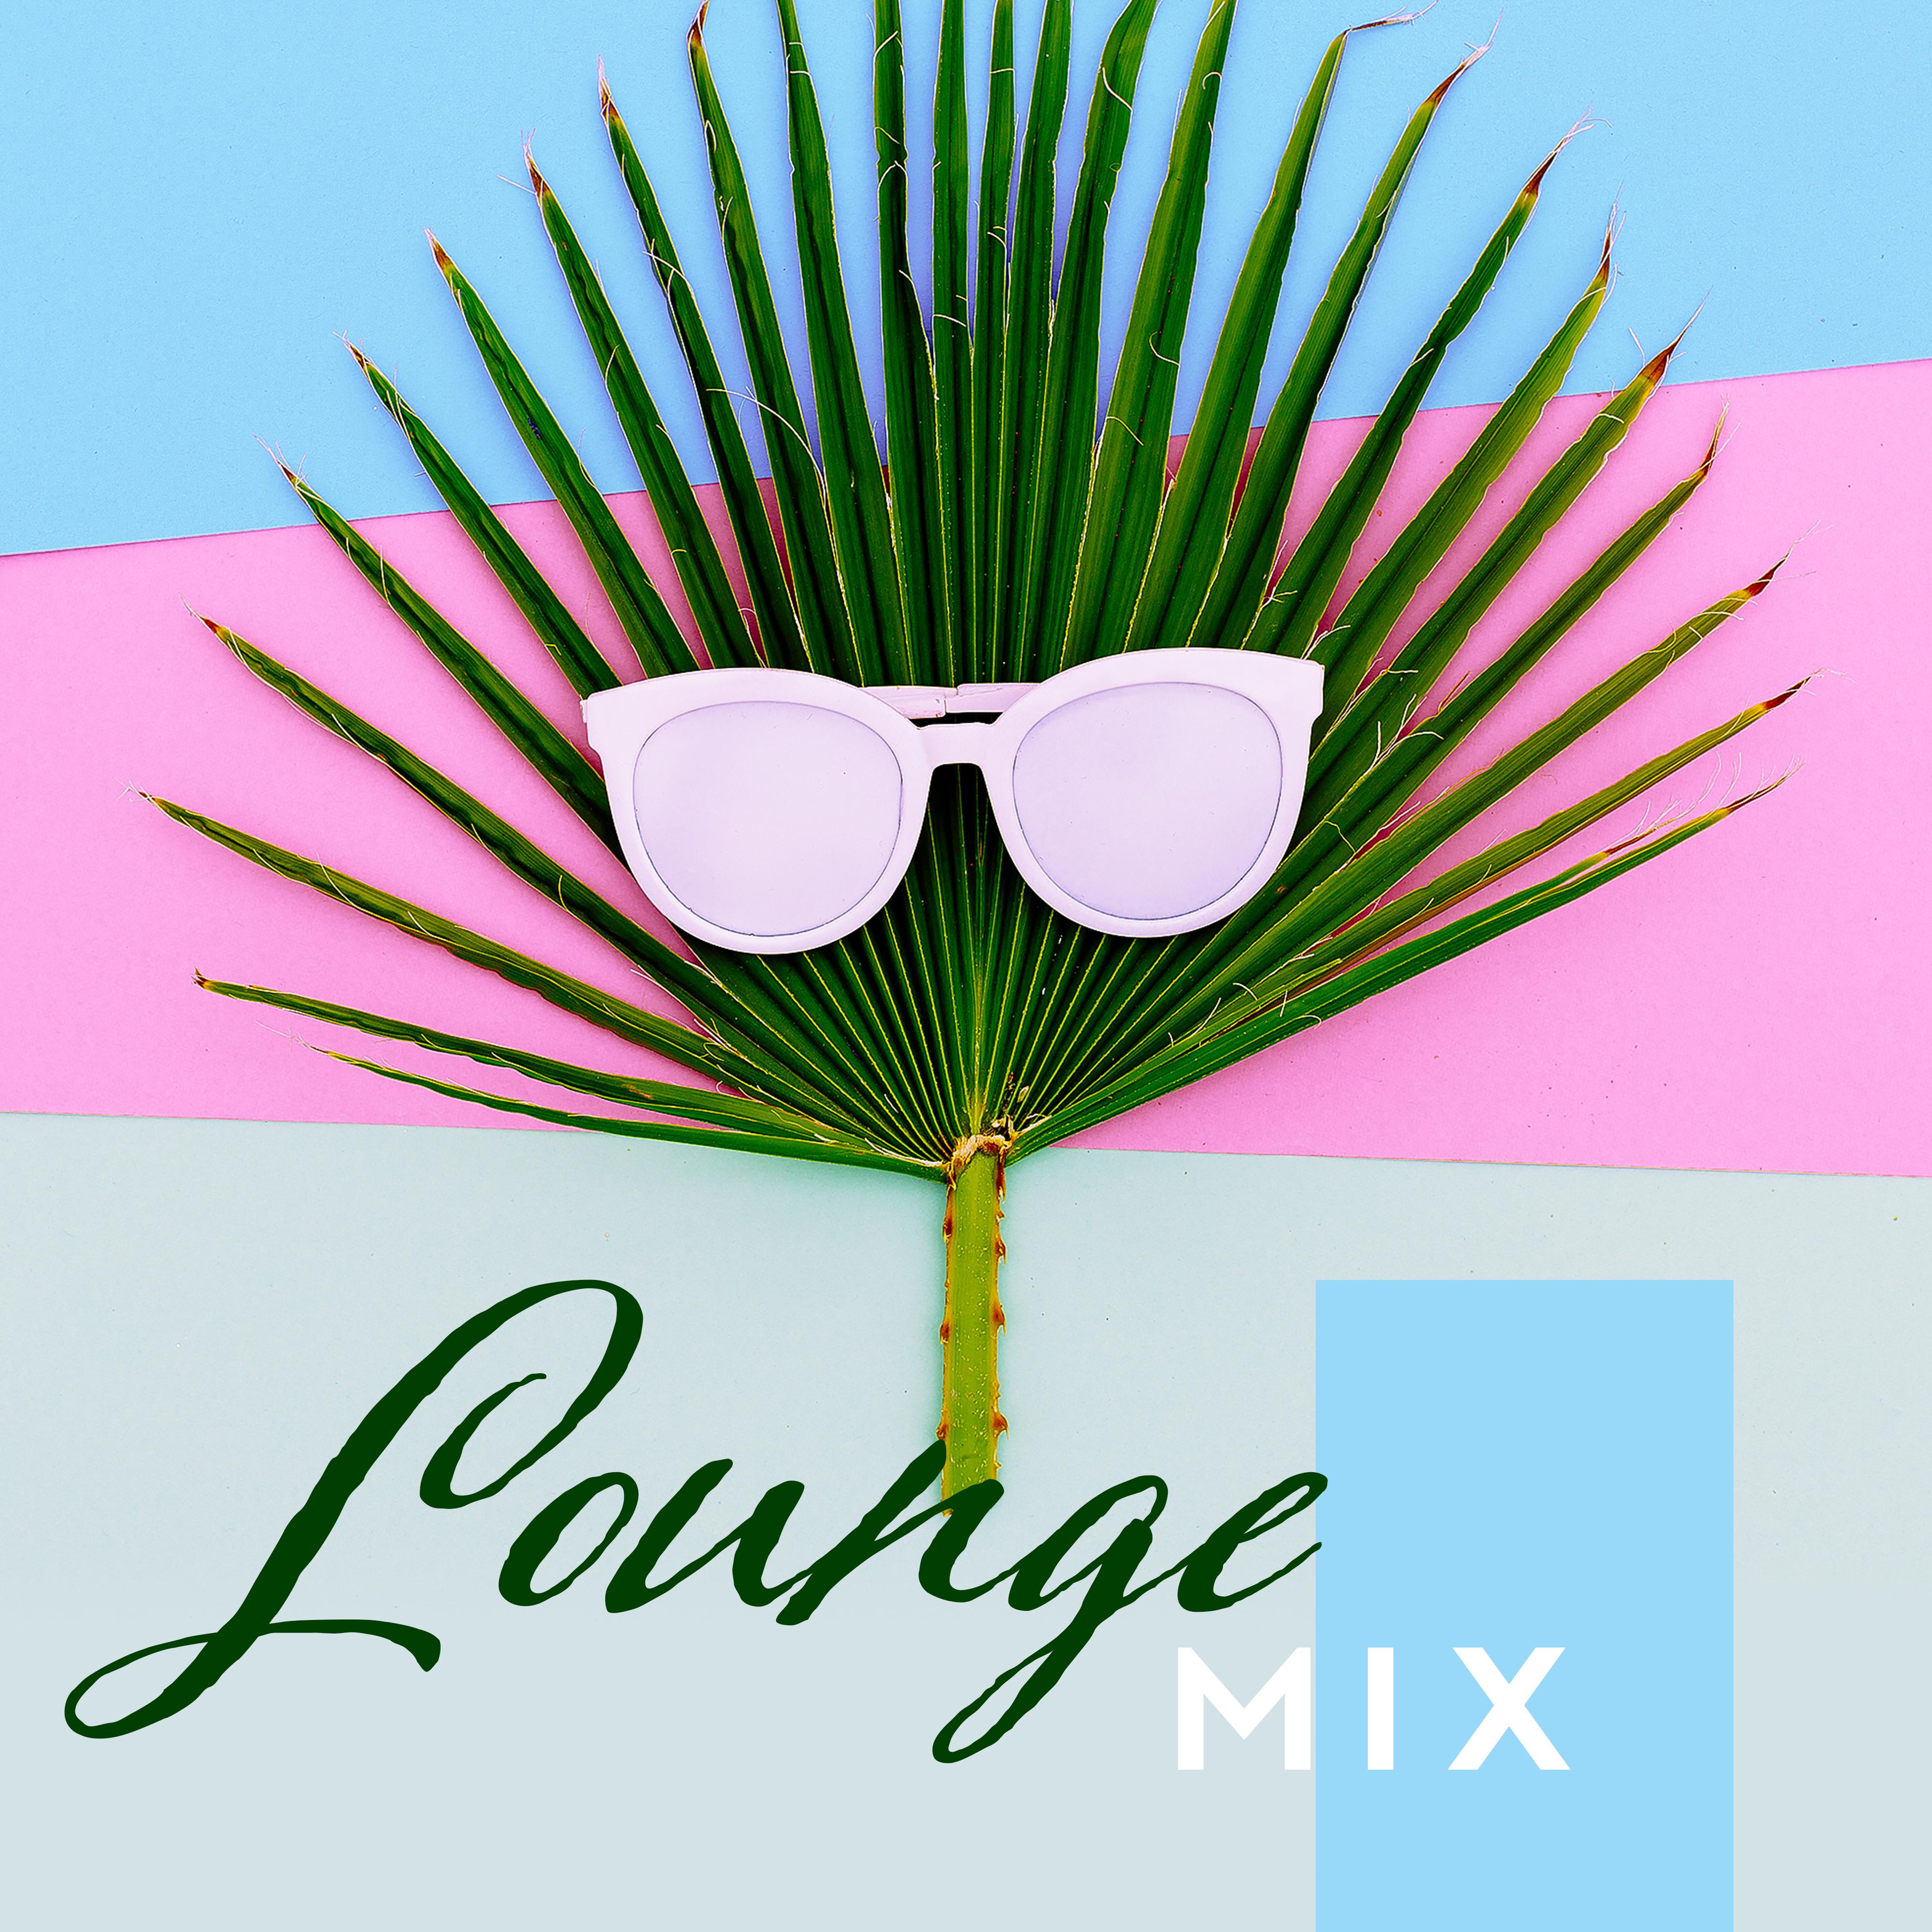 Lounge Mix  Chillout 2019, Bar Lounge, Chill Collection, Ambient Music, Beach Chillout, Total Relax